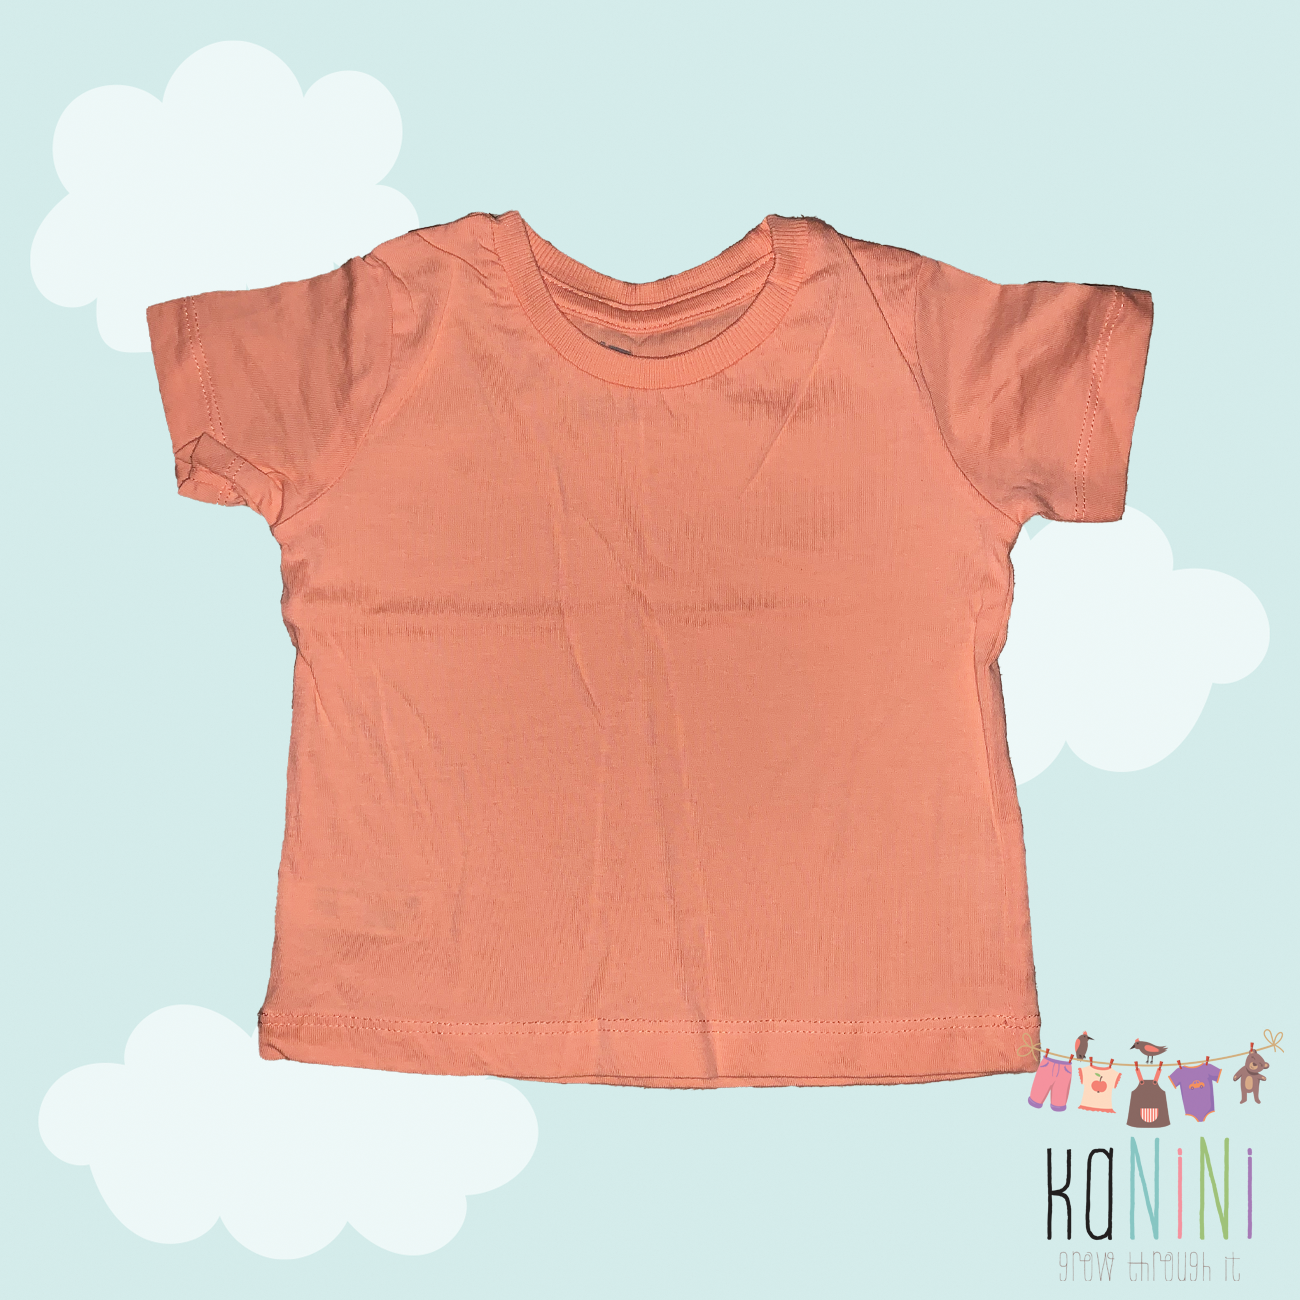 Featured image for “Woolworths 6 - 12 Months Boys Peach T-Shirt”